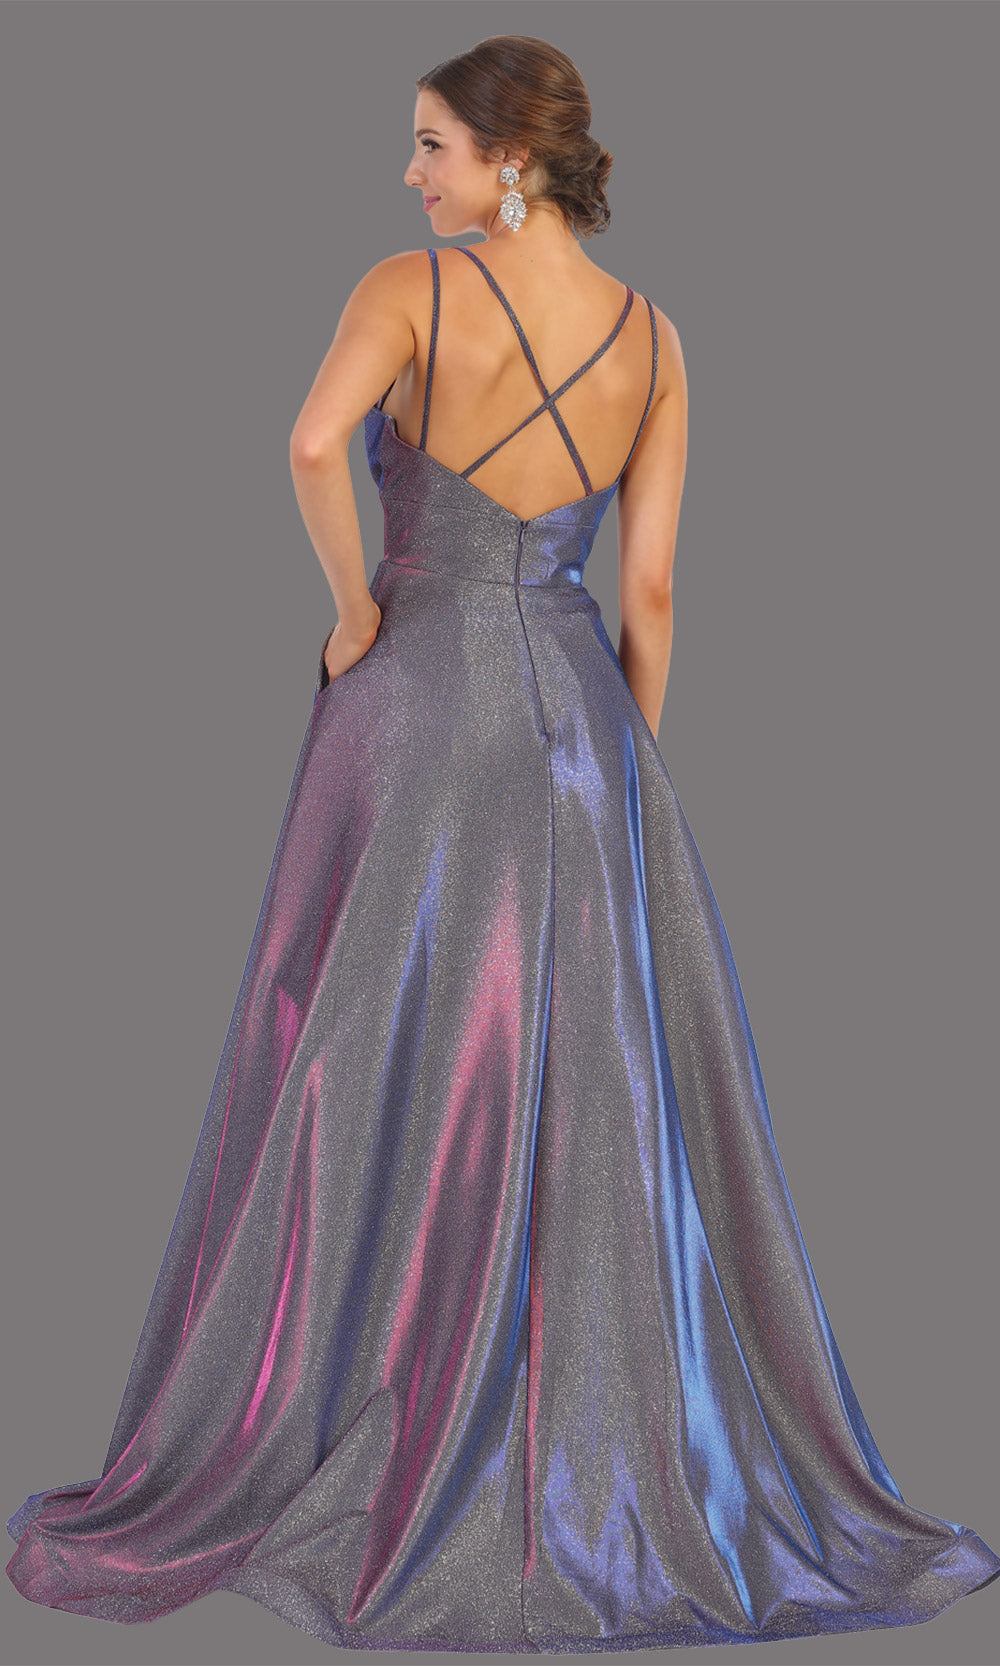 Mayqueen MQ1756 long purple metallic evening flowy dress w/low back & straps. Full length purple gown is perfect for enagagement/e-shoot dress, wedding reception dress, indowestern gown, formal evening party dress, prom. Plus sizes avail-b